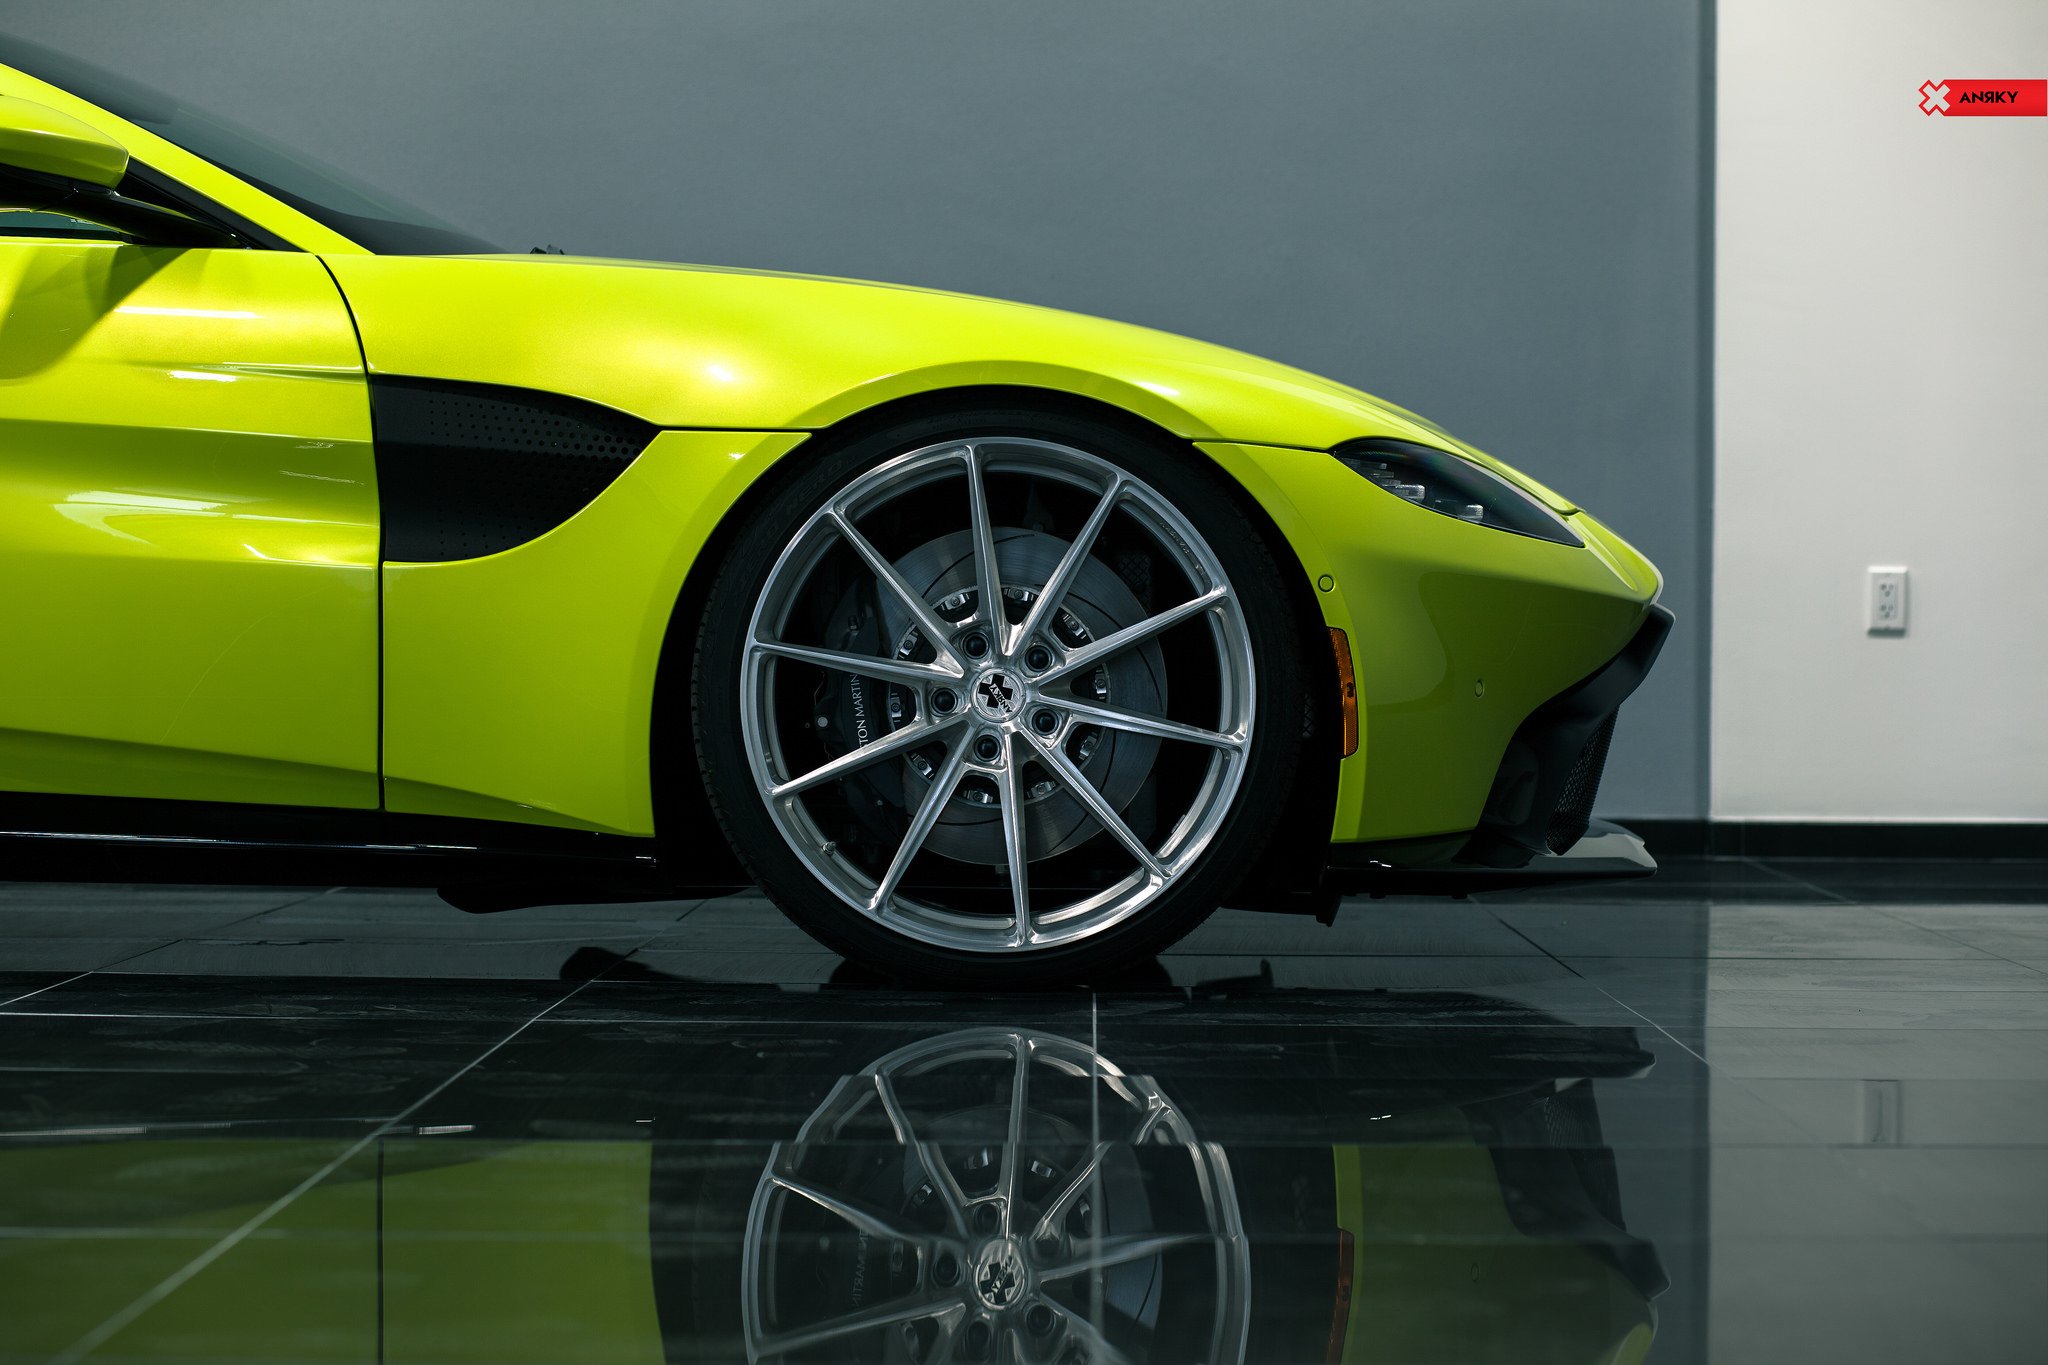 Lime Green Aston Martin Vantage with Custom Anrky Wheels - Photo by ANRKY Wheels